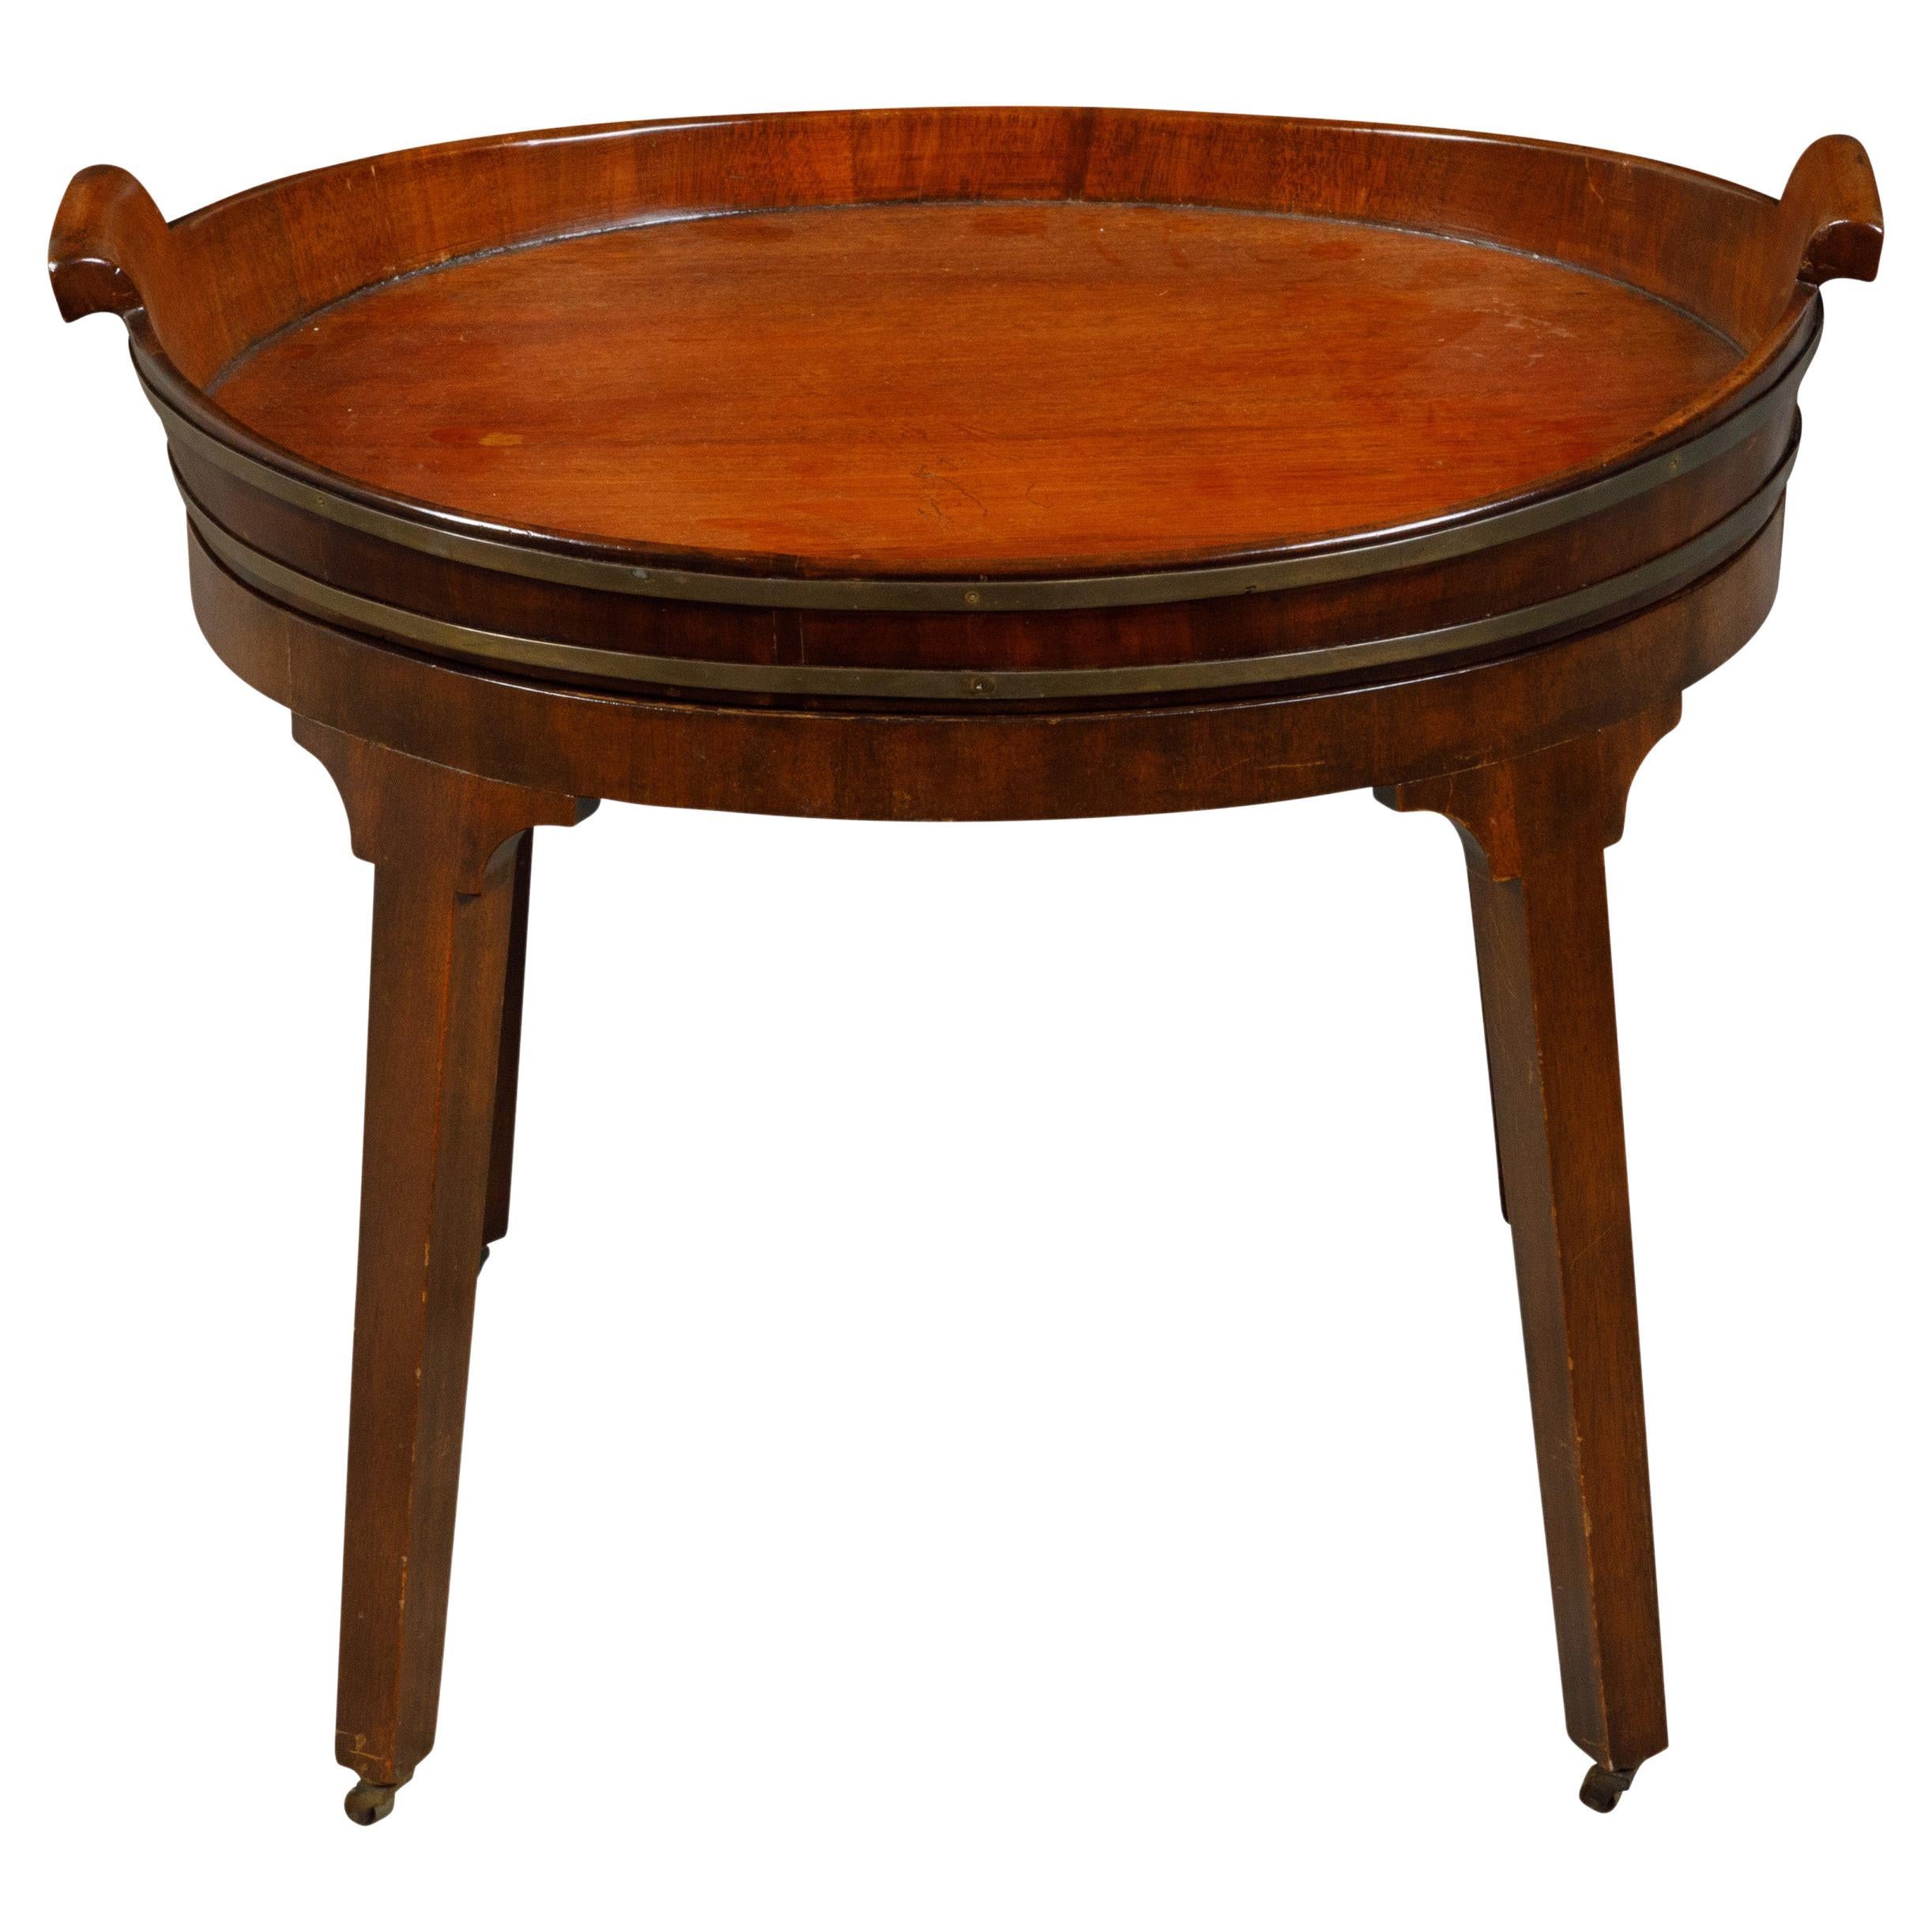 English 19th Century Oval Mahogany Tray Top Table with Brass Accents and Casters